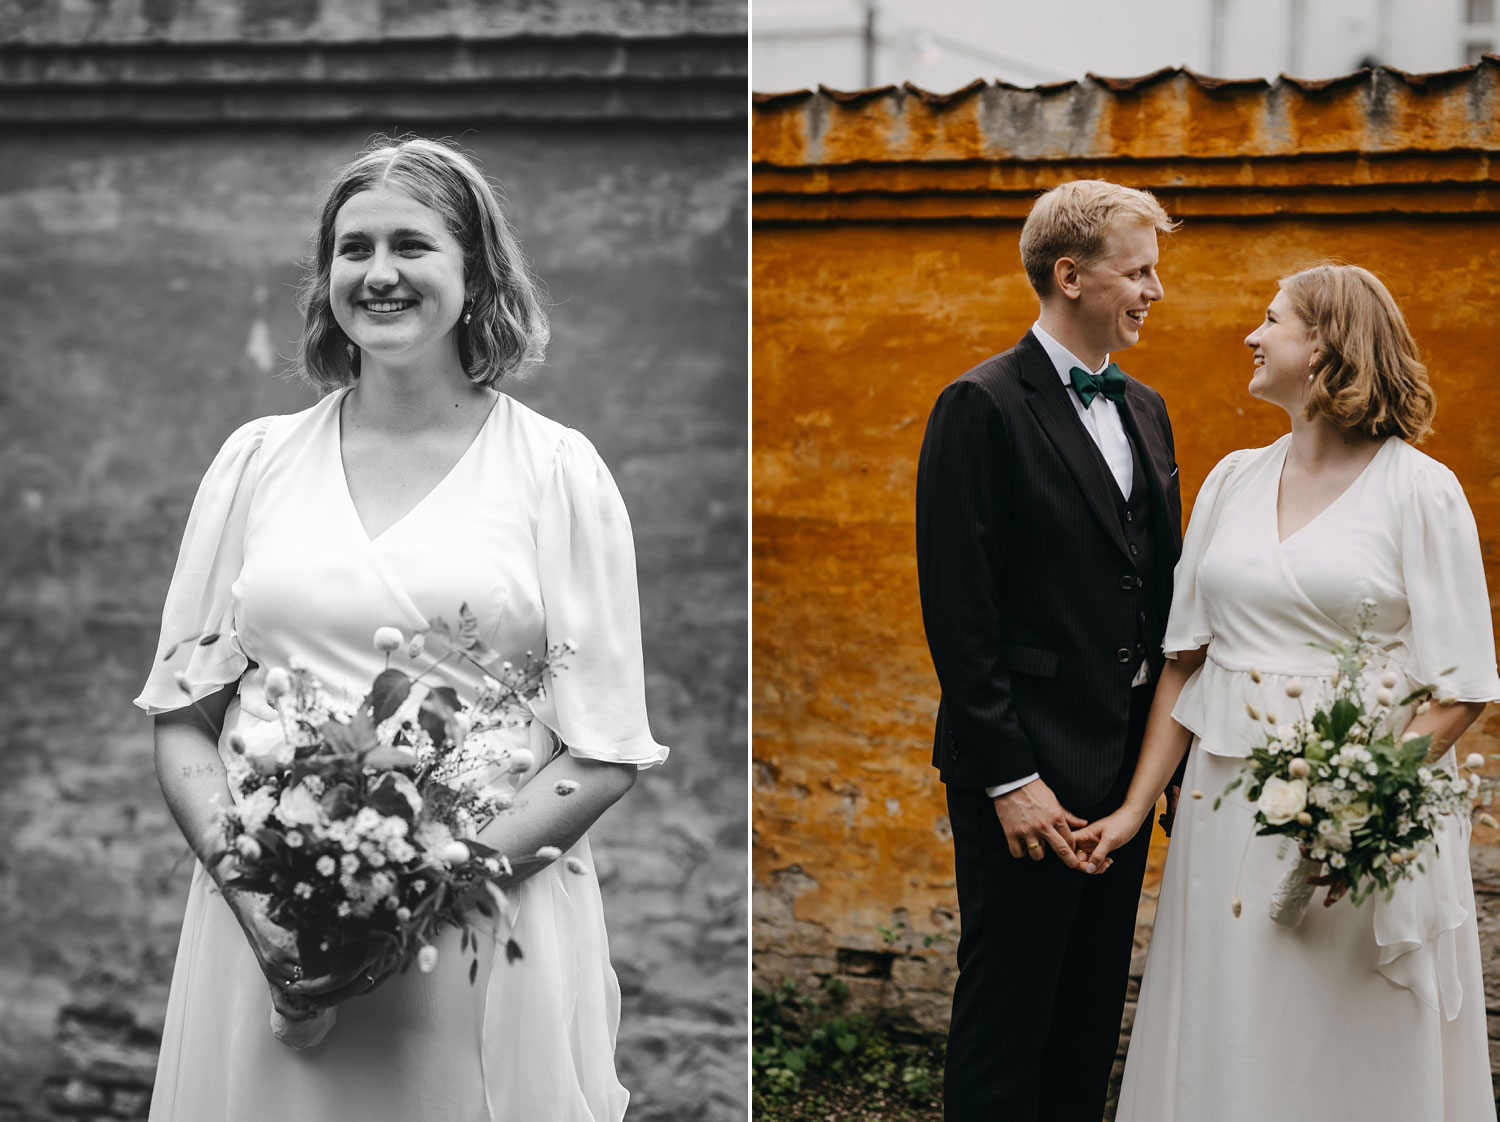 black and white wedding photo of newlyweds in formal attire, radiating joy in the stunning Frederiksberg Have gardens